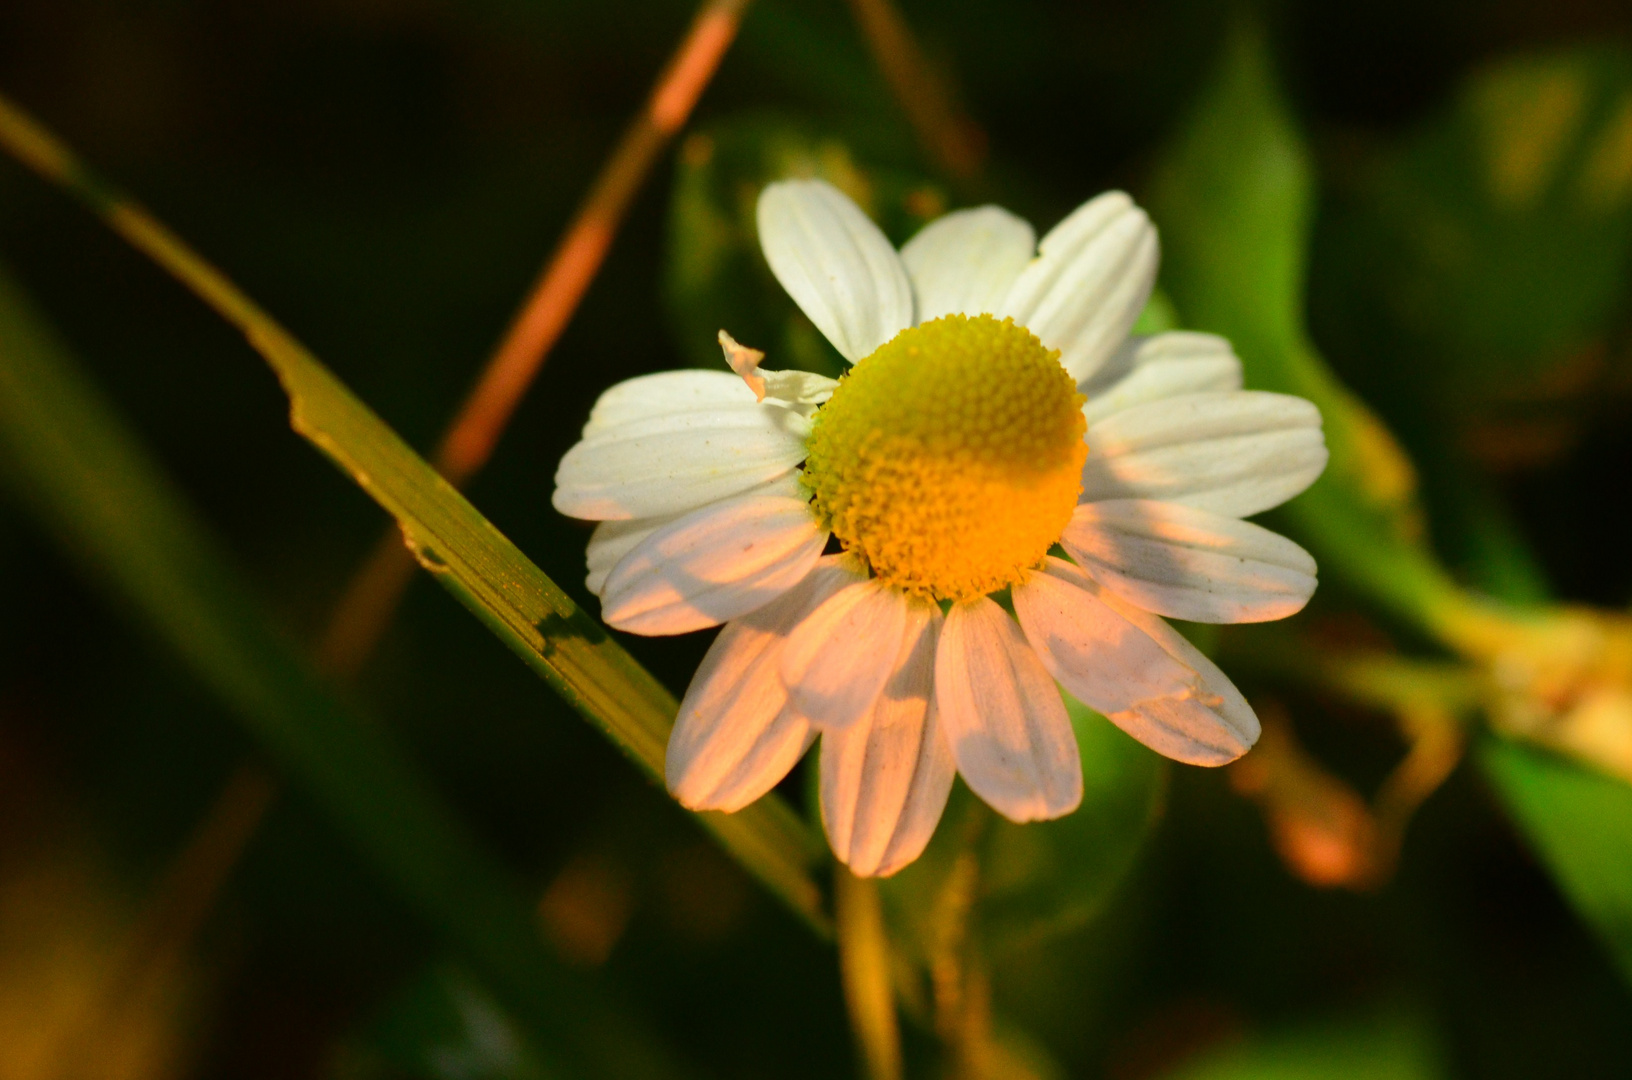 camomile in the evening light